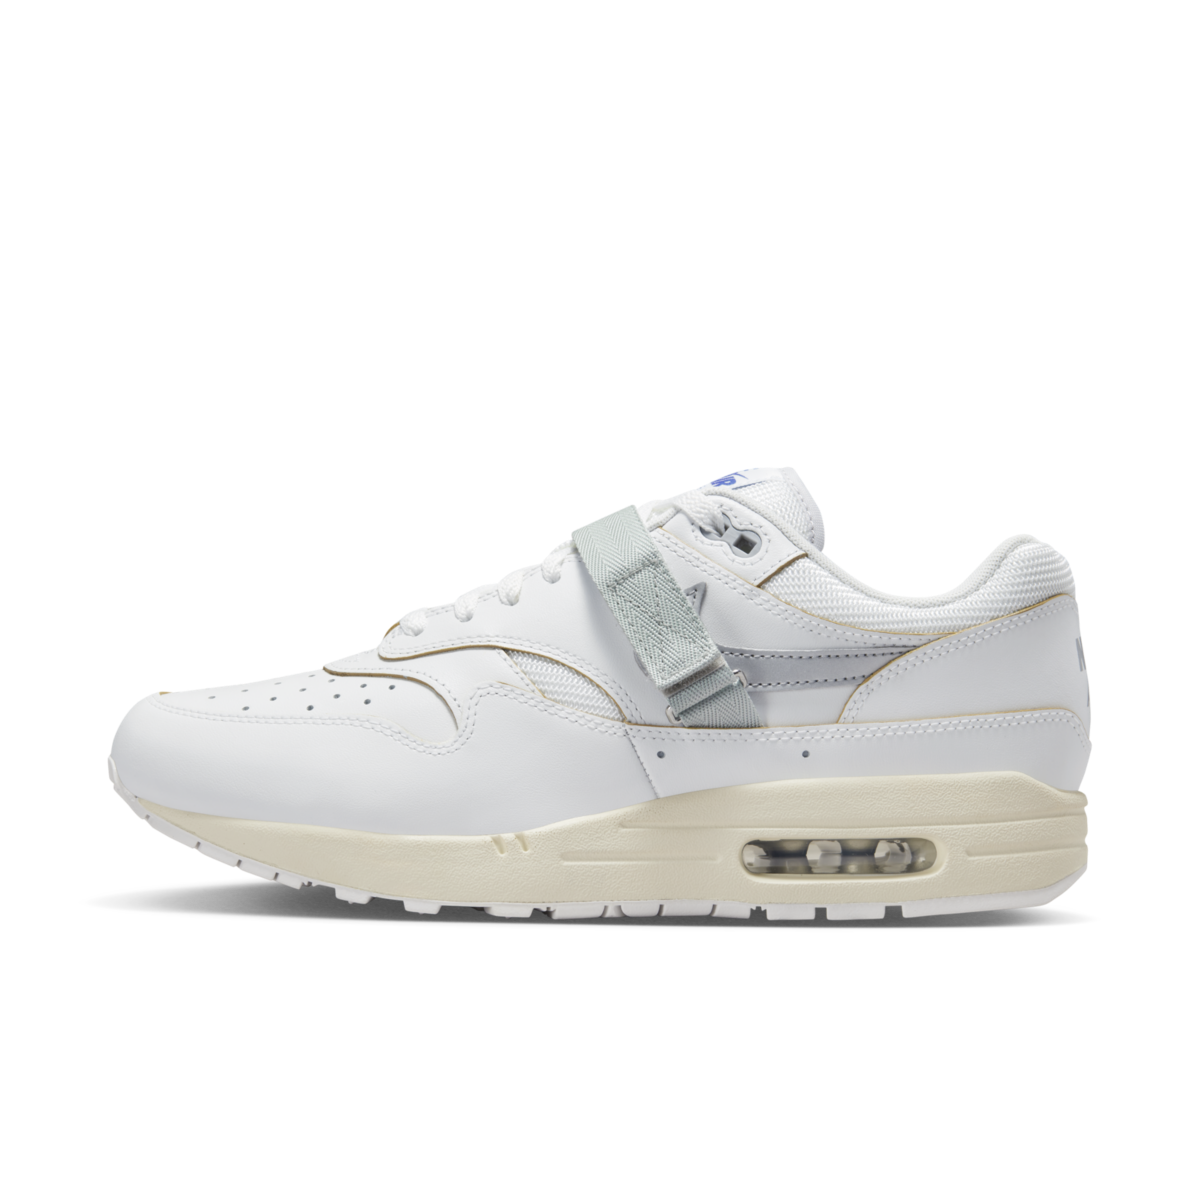 Nike Air Max 1 'Timeless' - Asia Exclusive